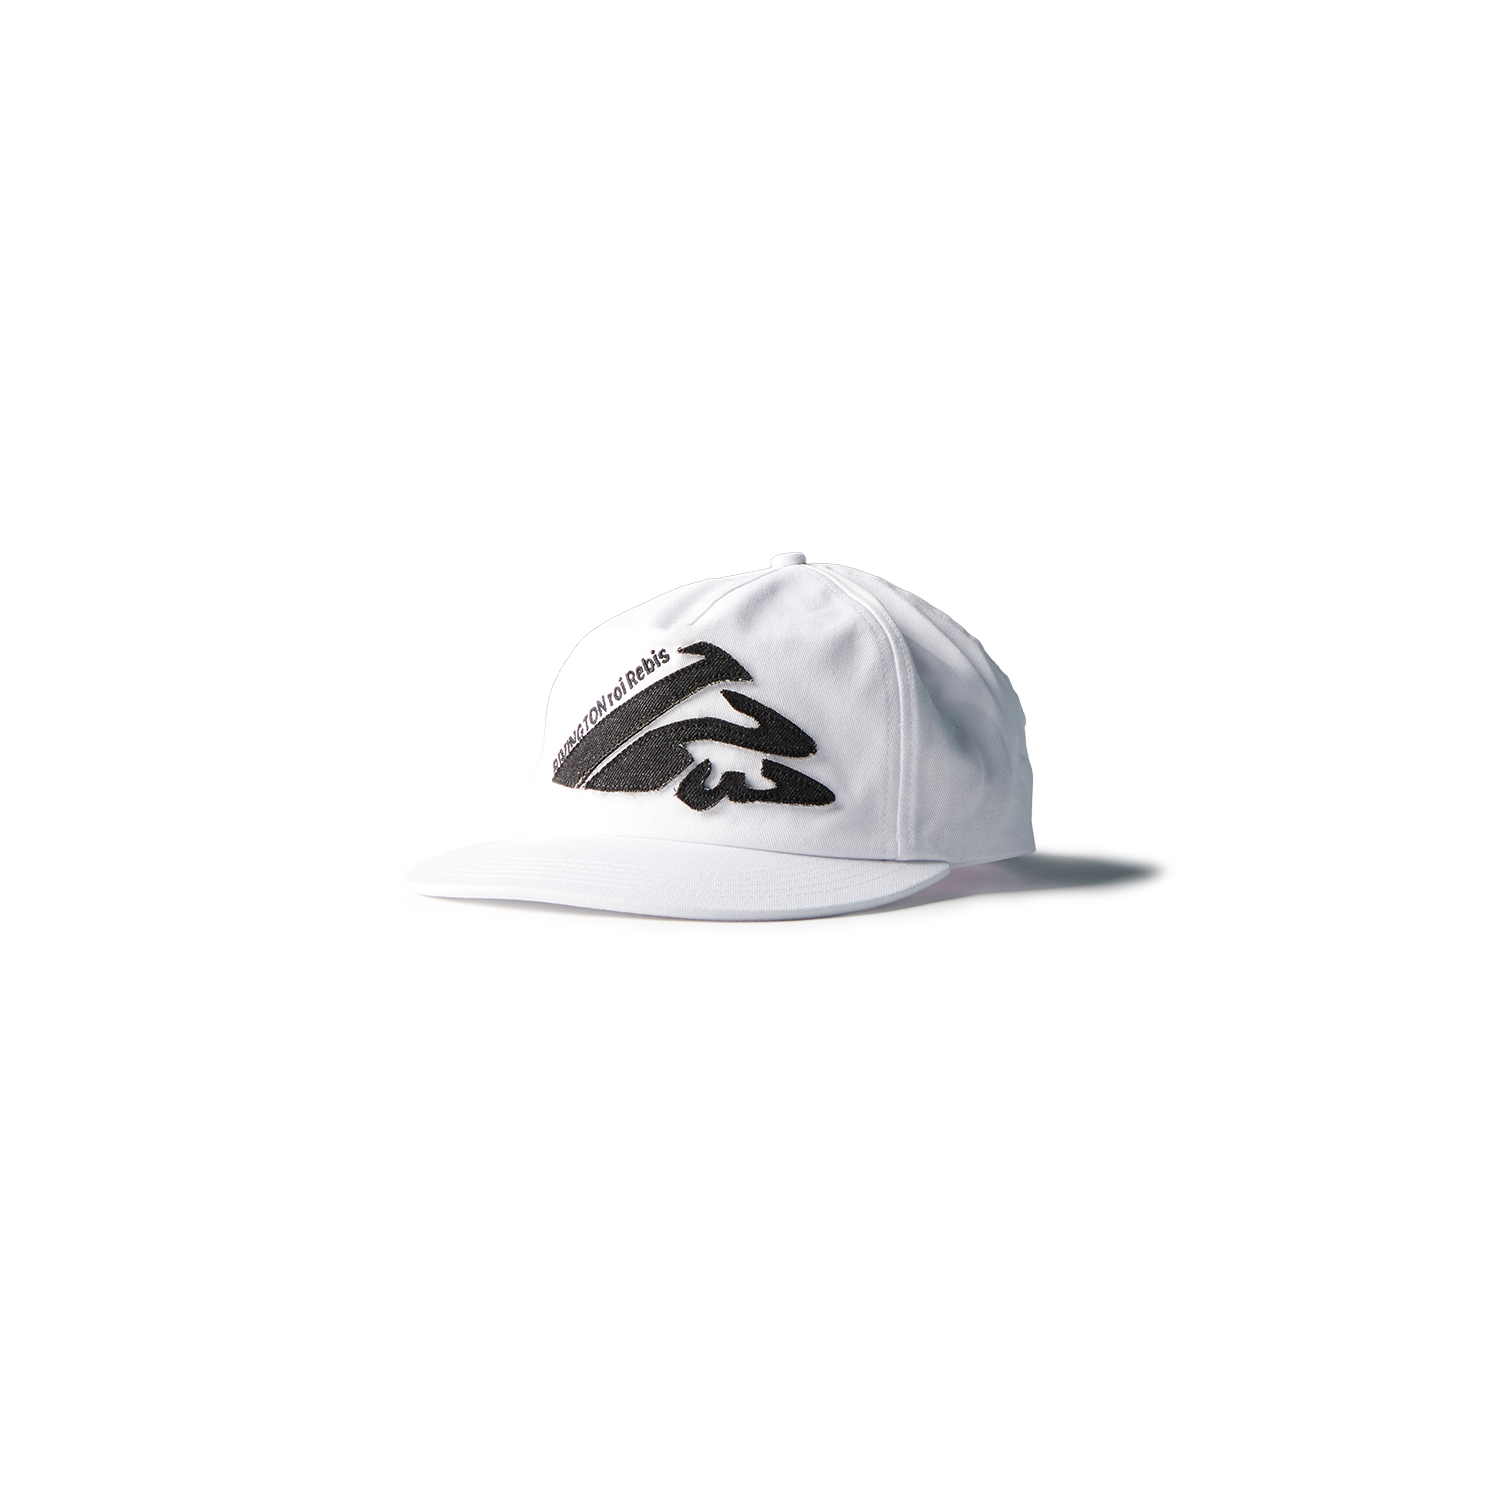 RRR123 - Gymgno Hat product image